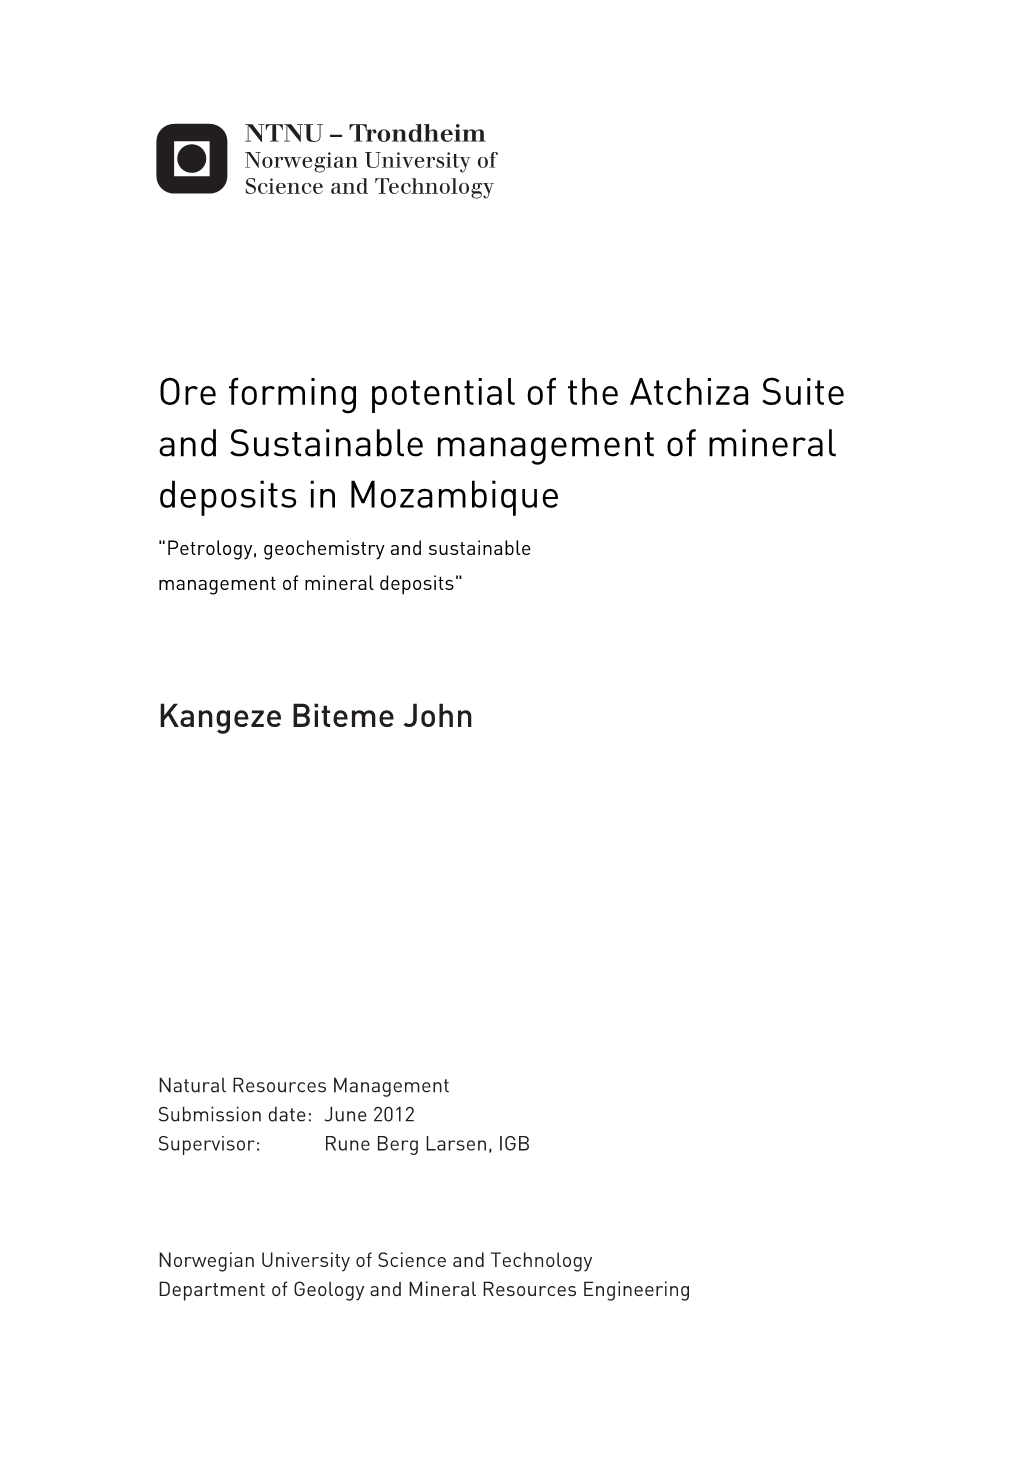 Ore Forming Potential of the Atchiza Suite and Sustainable Management of Mineral Deposits in Mozambique